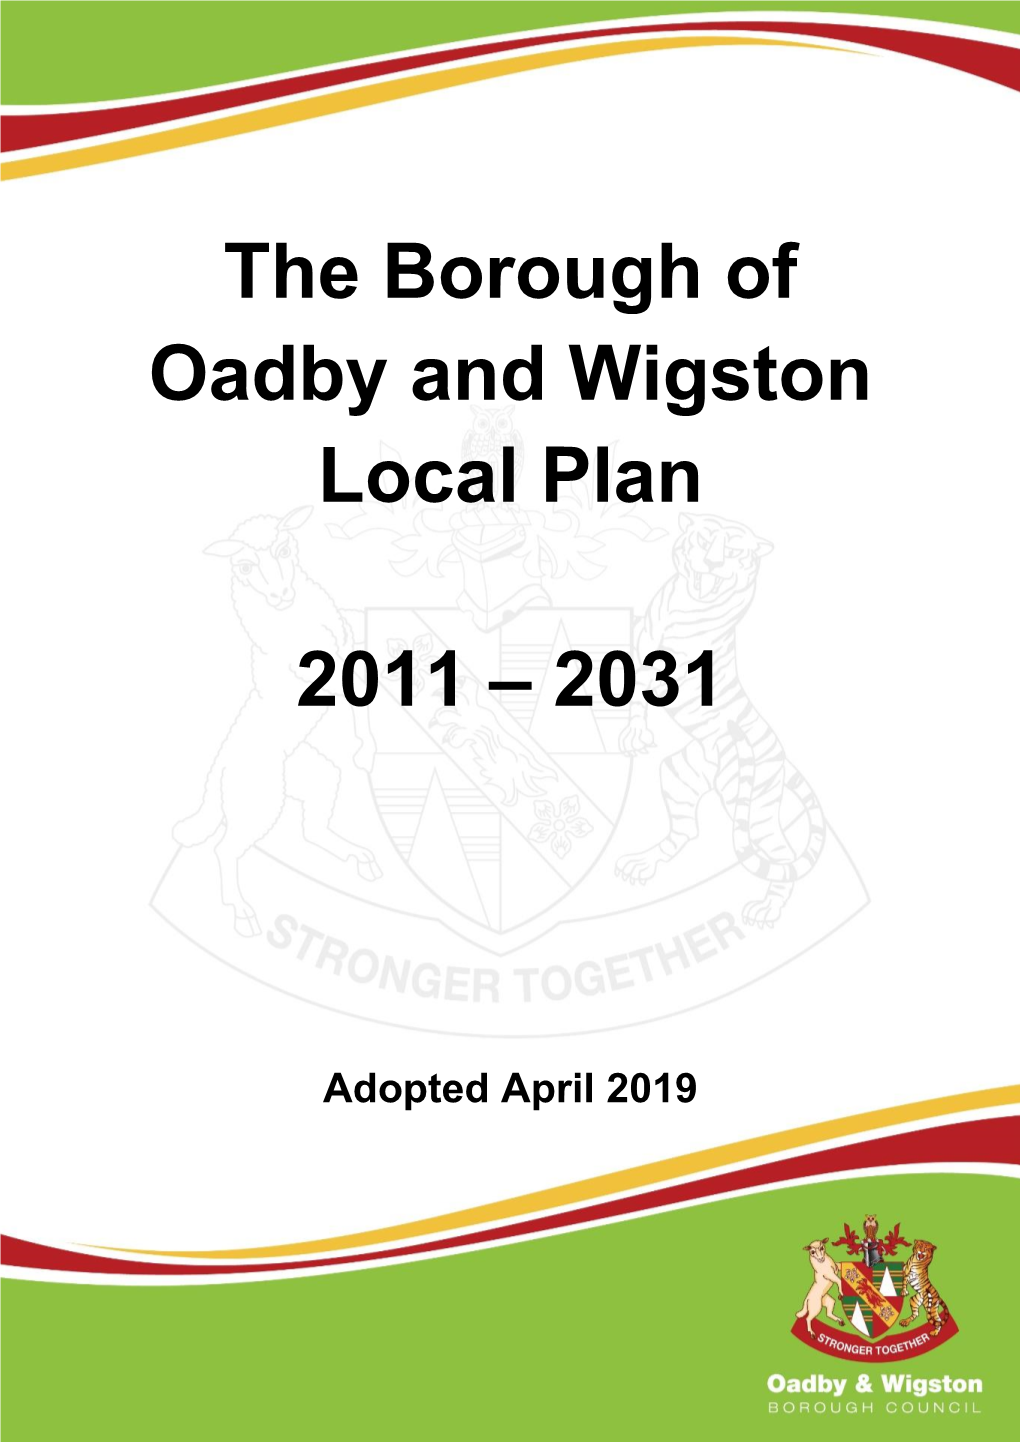 The Borough of Oadby and Wigston Local Plan 2011 – 2031